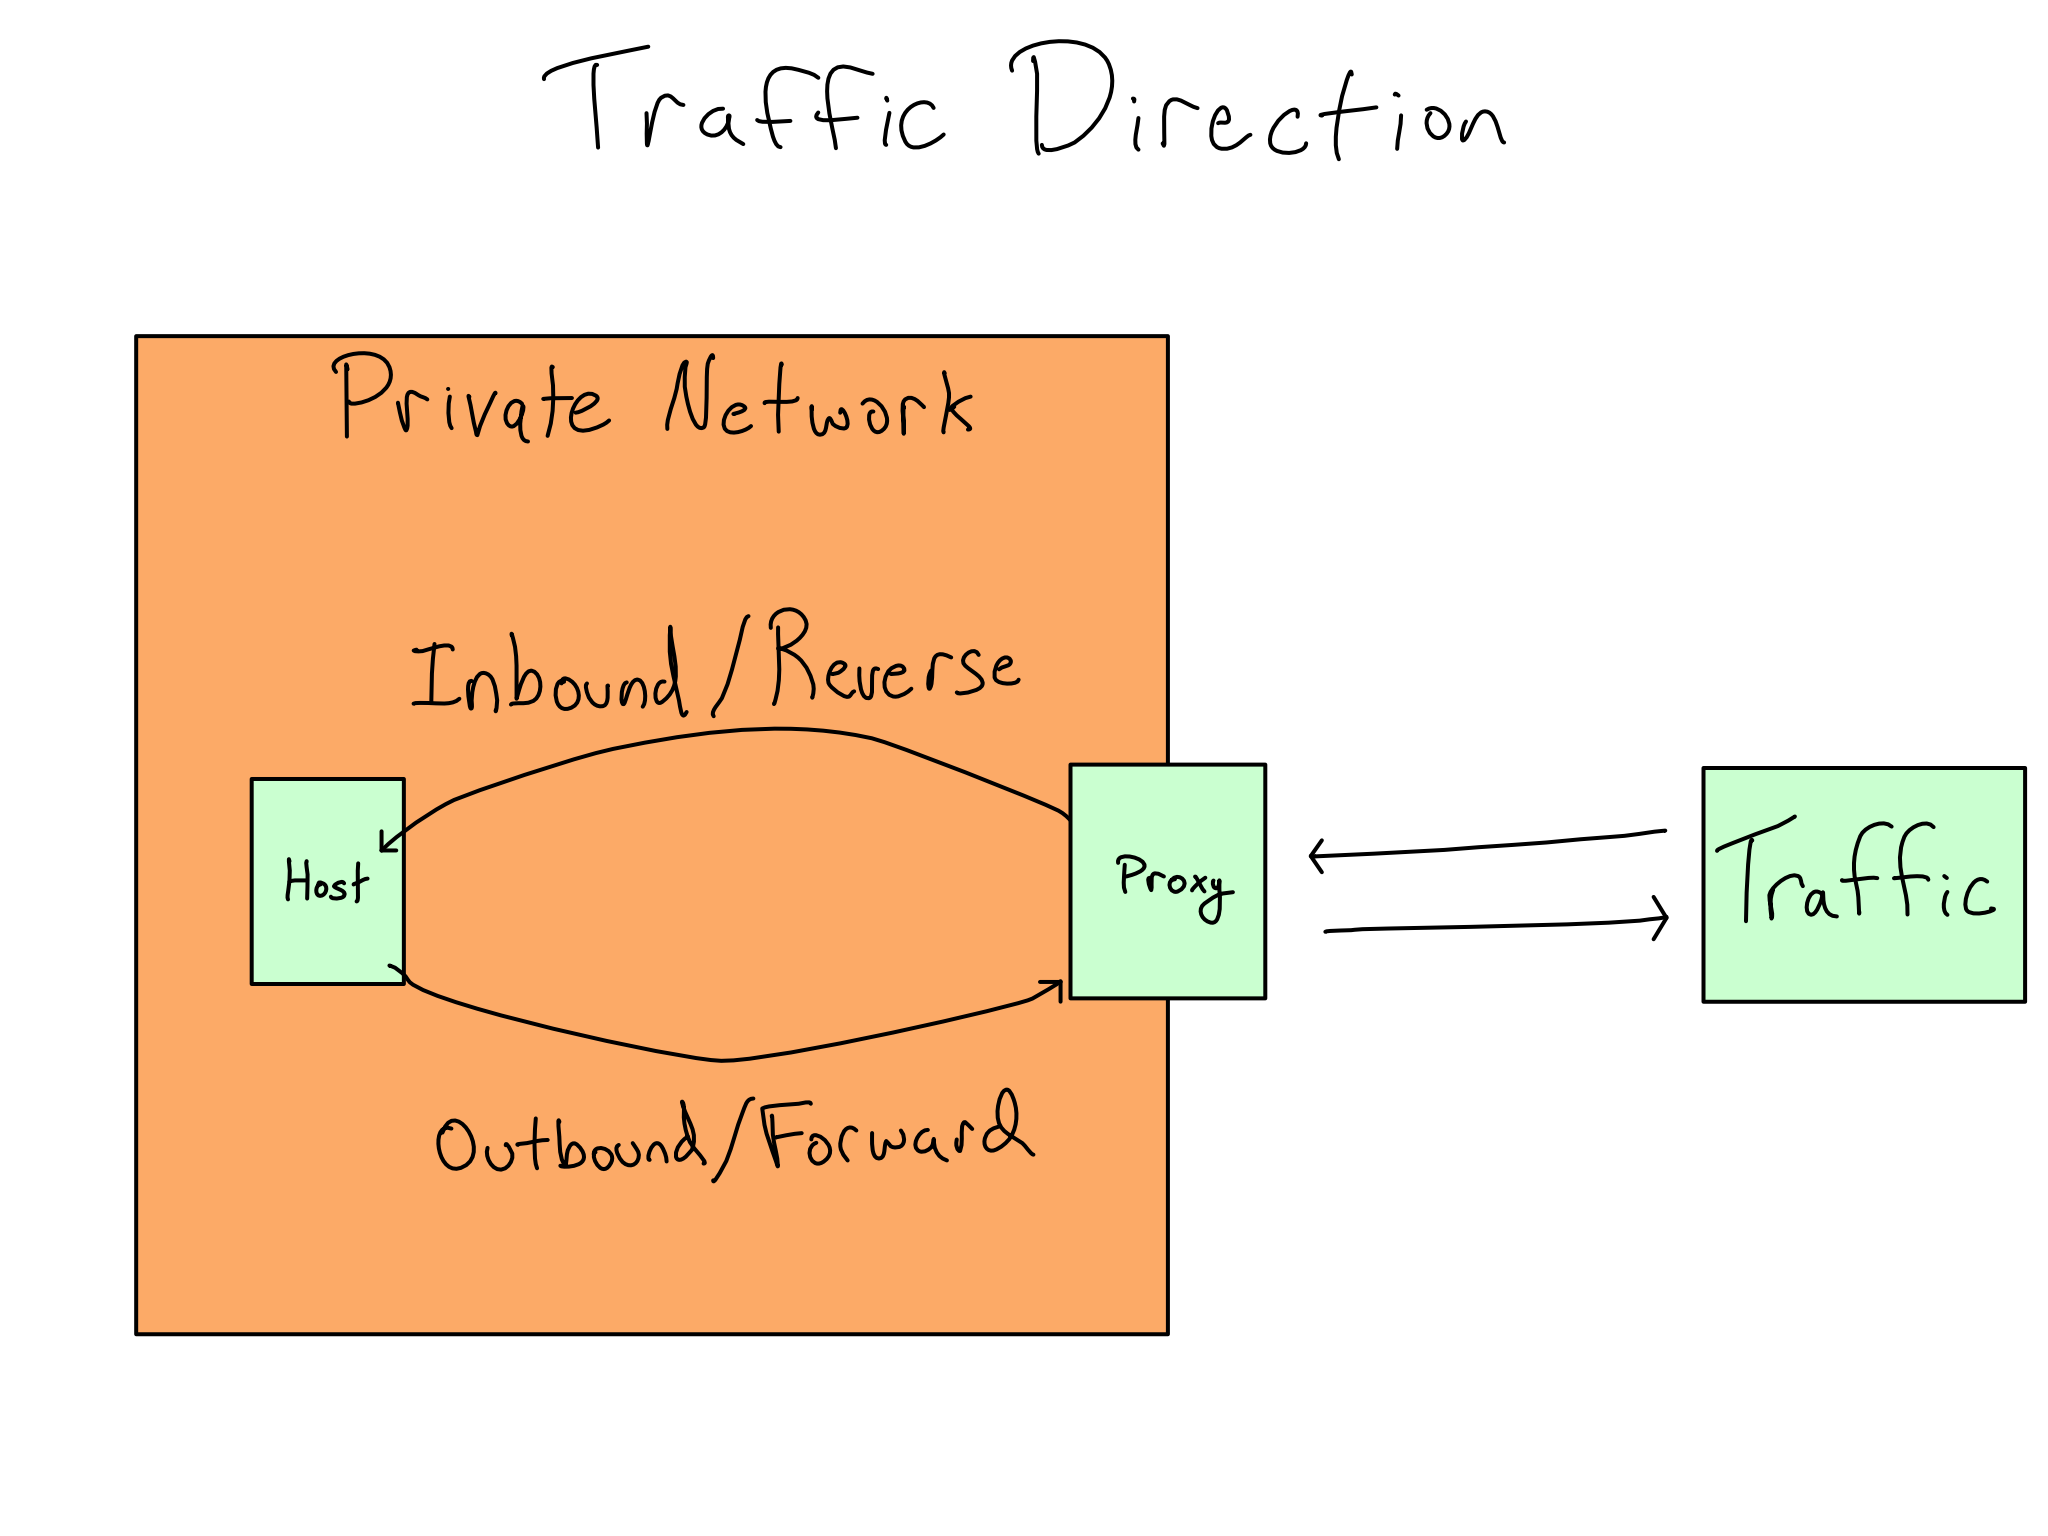 Inbound/Reverse proxies handle traffic into the private network. Outbound/Forward proxies handle traffic going out.